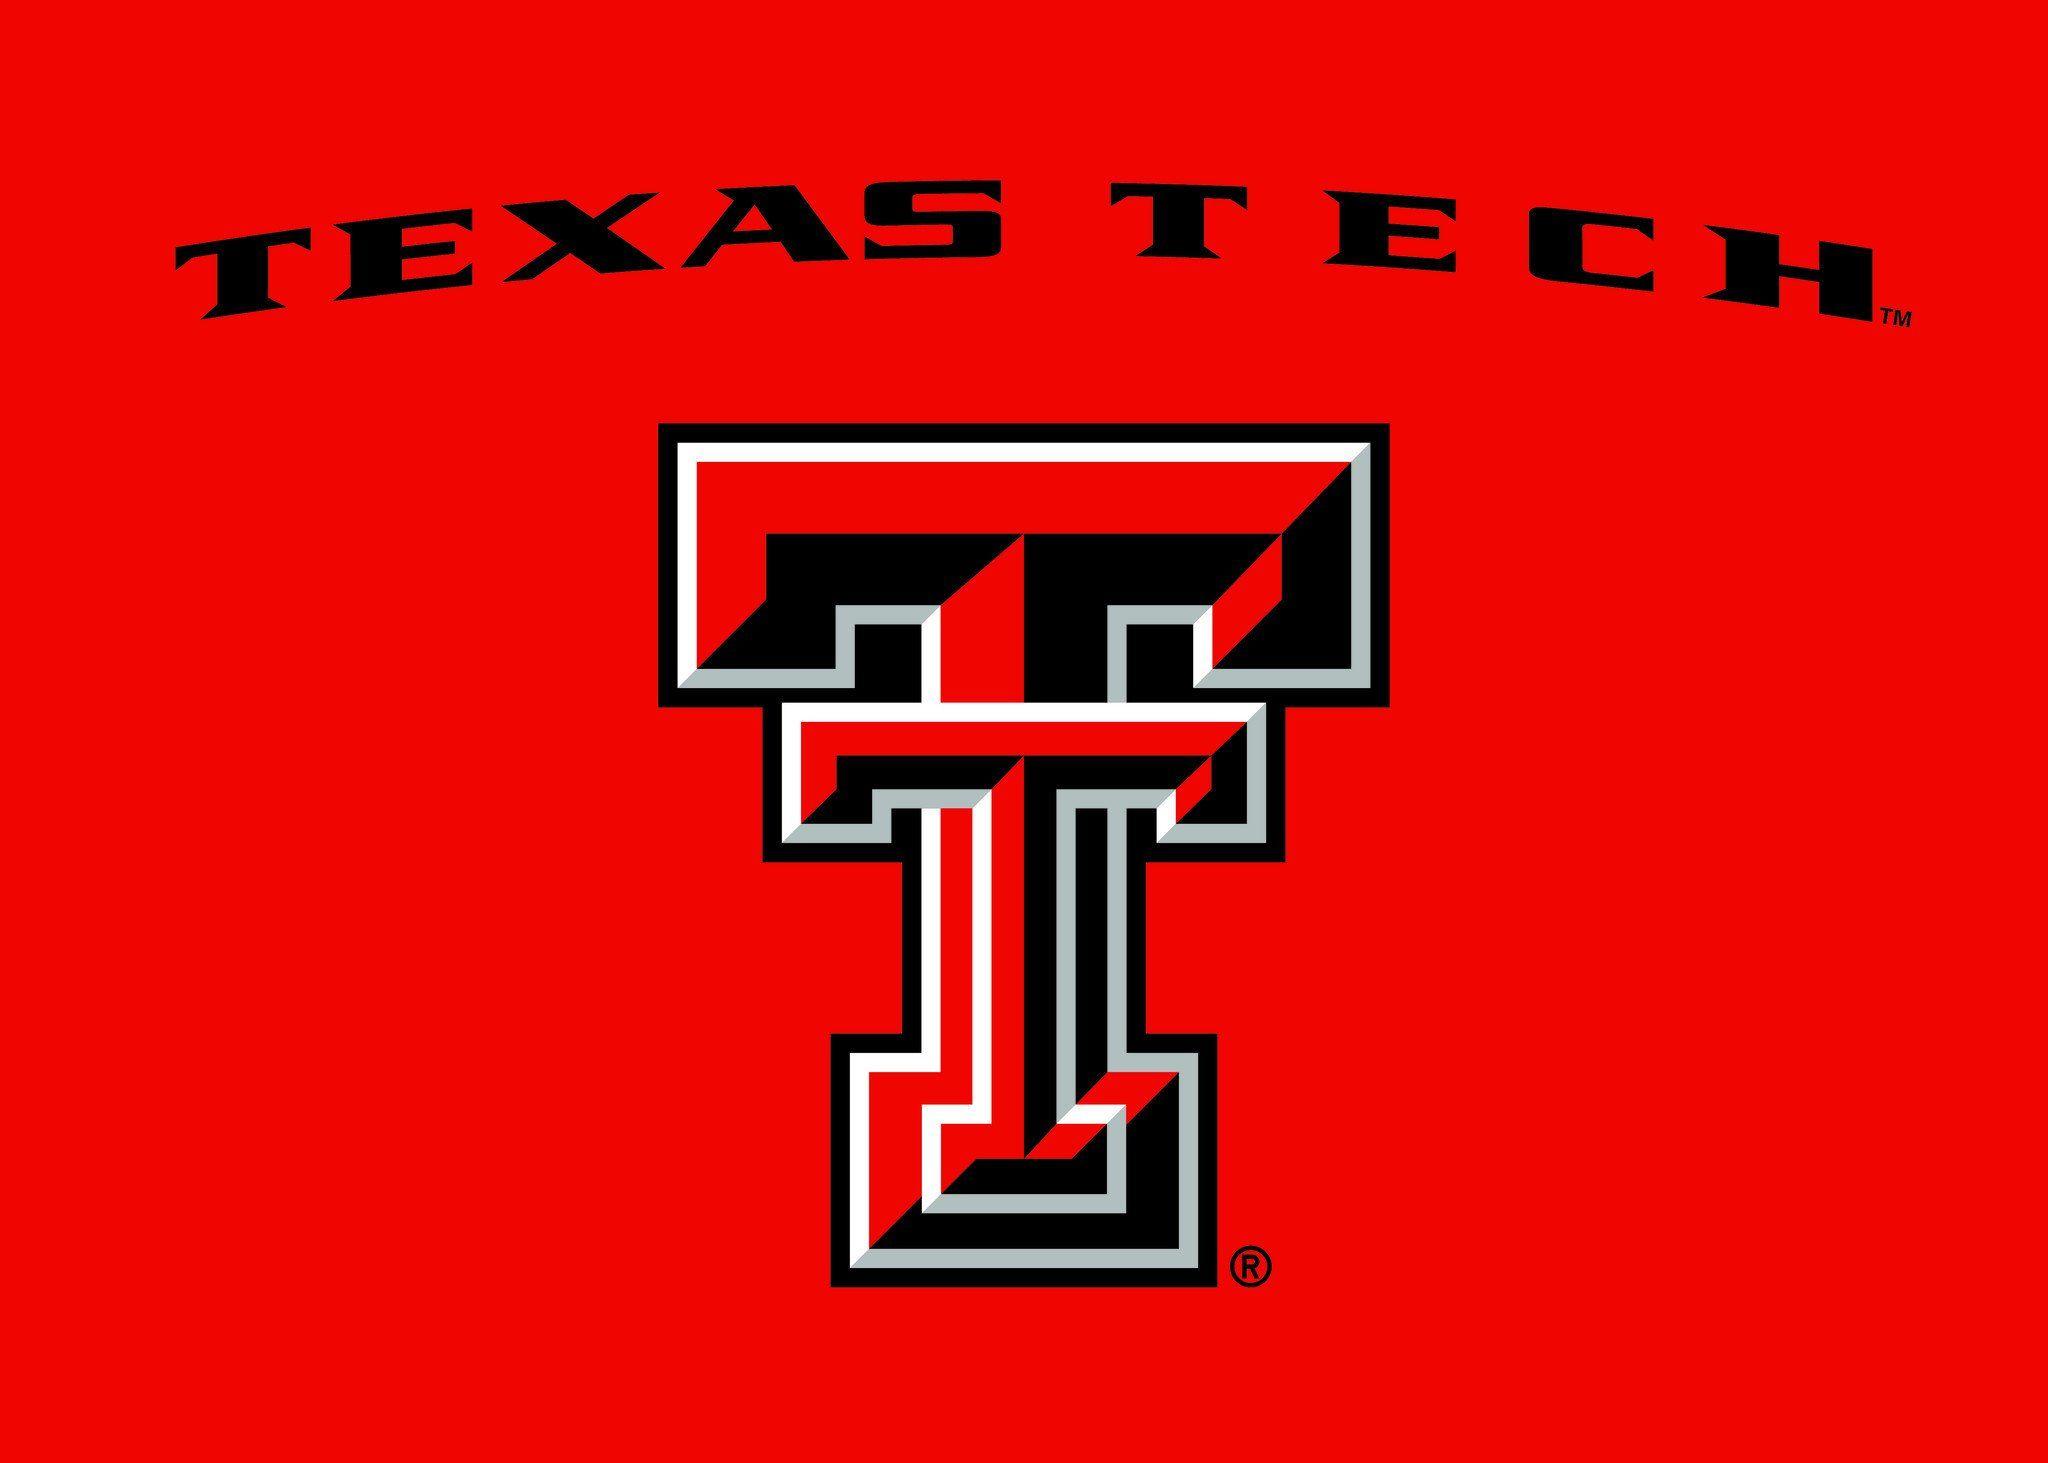 Texas Tech Red Raiders Logo - TEXAS TECH RED RAIDERS Blanket for a Blanket - With a Purpose